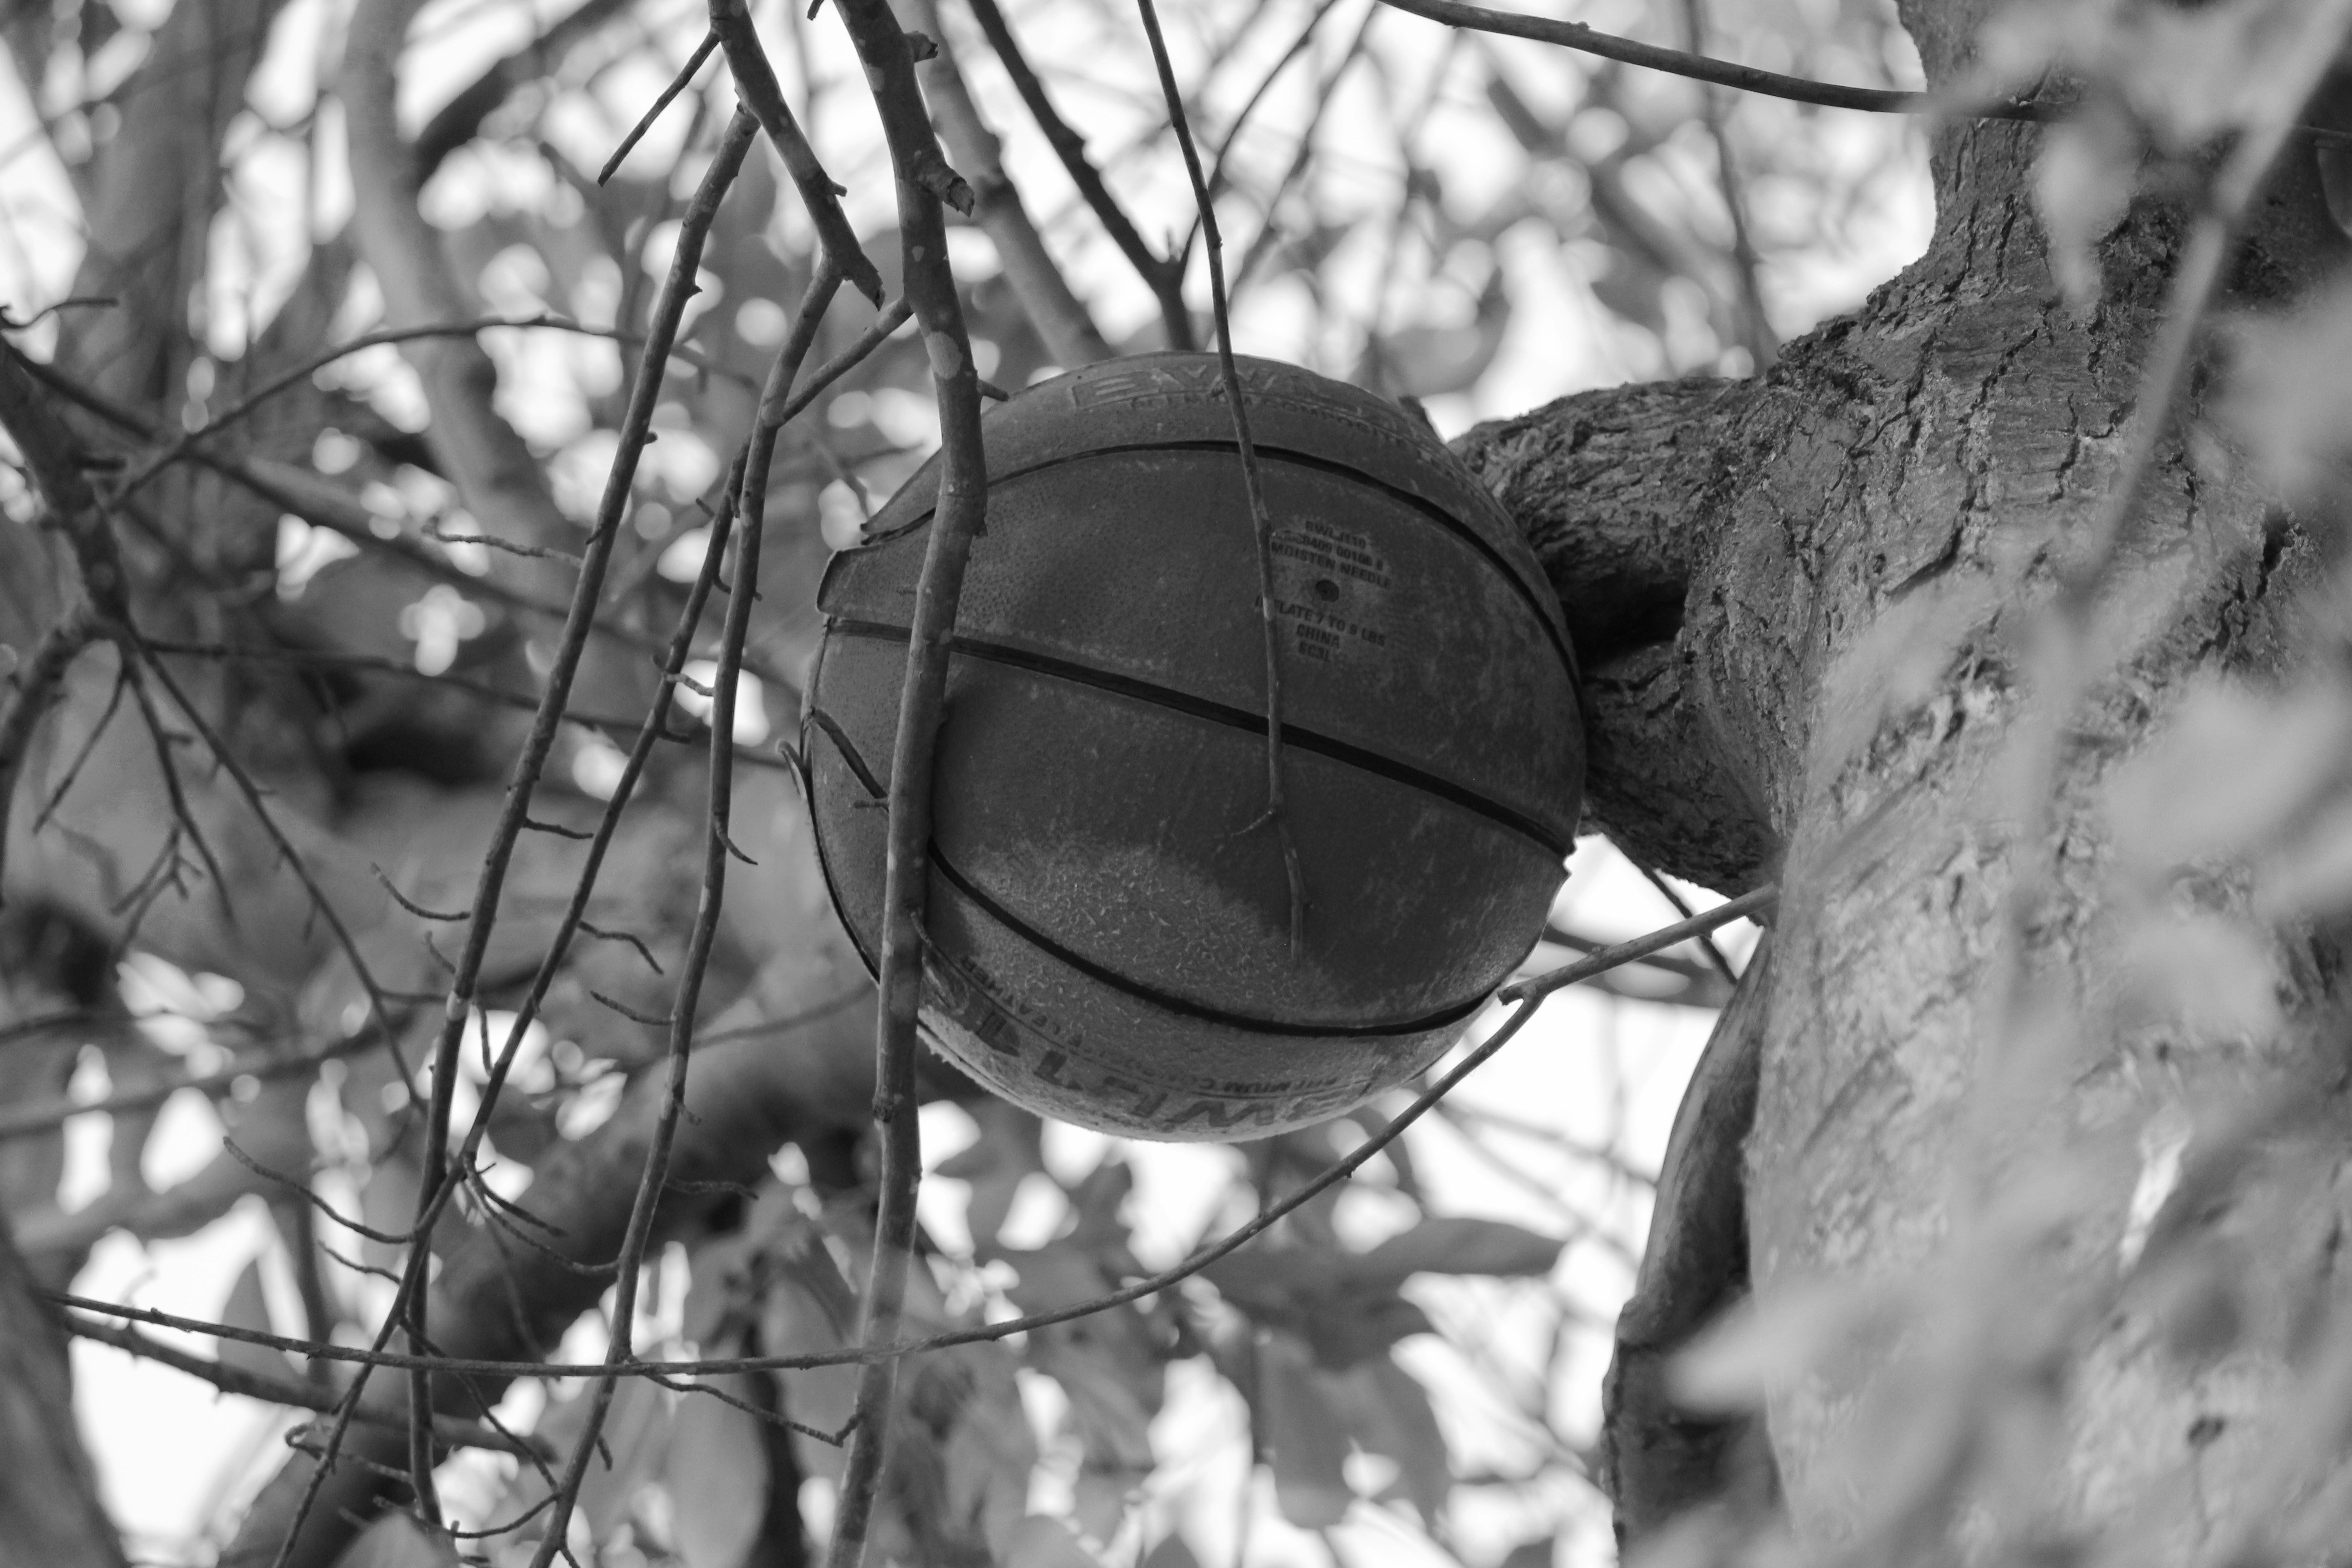 A basketball stuck in a tree, with a sad touch.